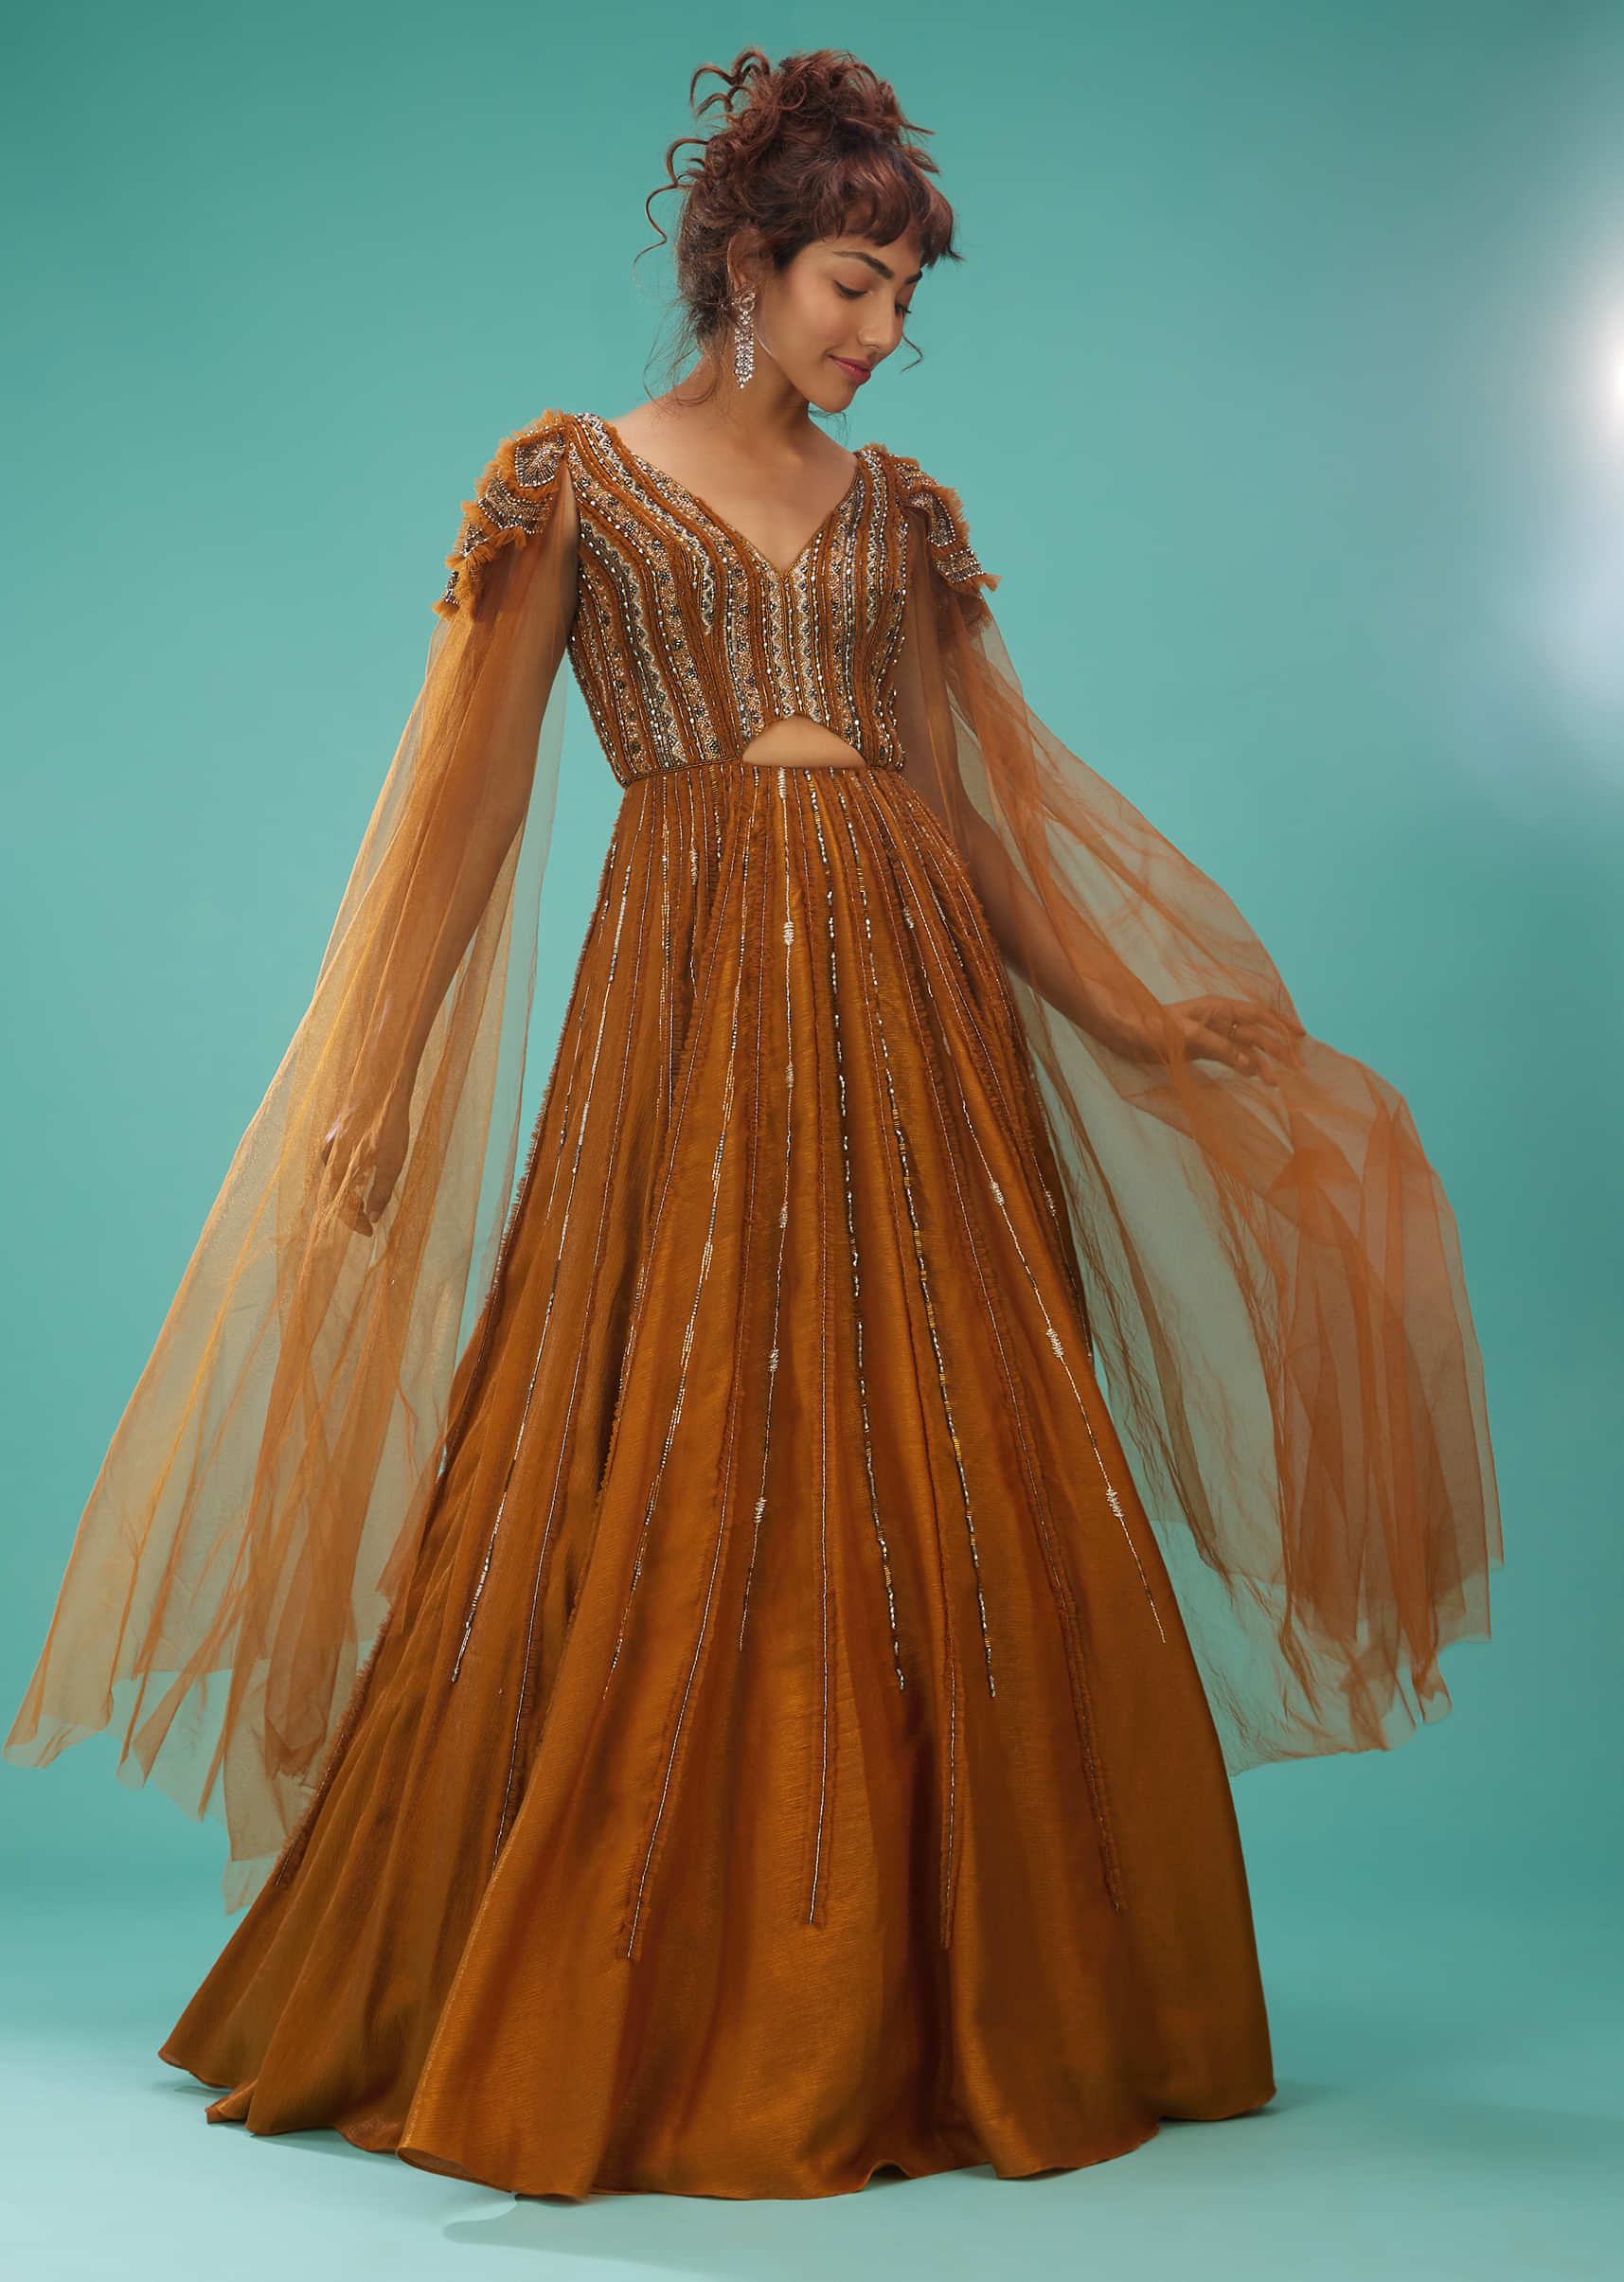 Rust Orange Ball Gown With Ruffle Frills And Embroidery